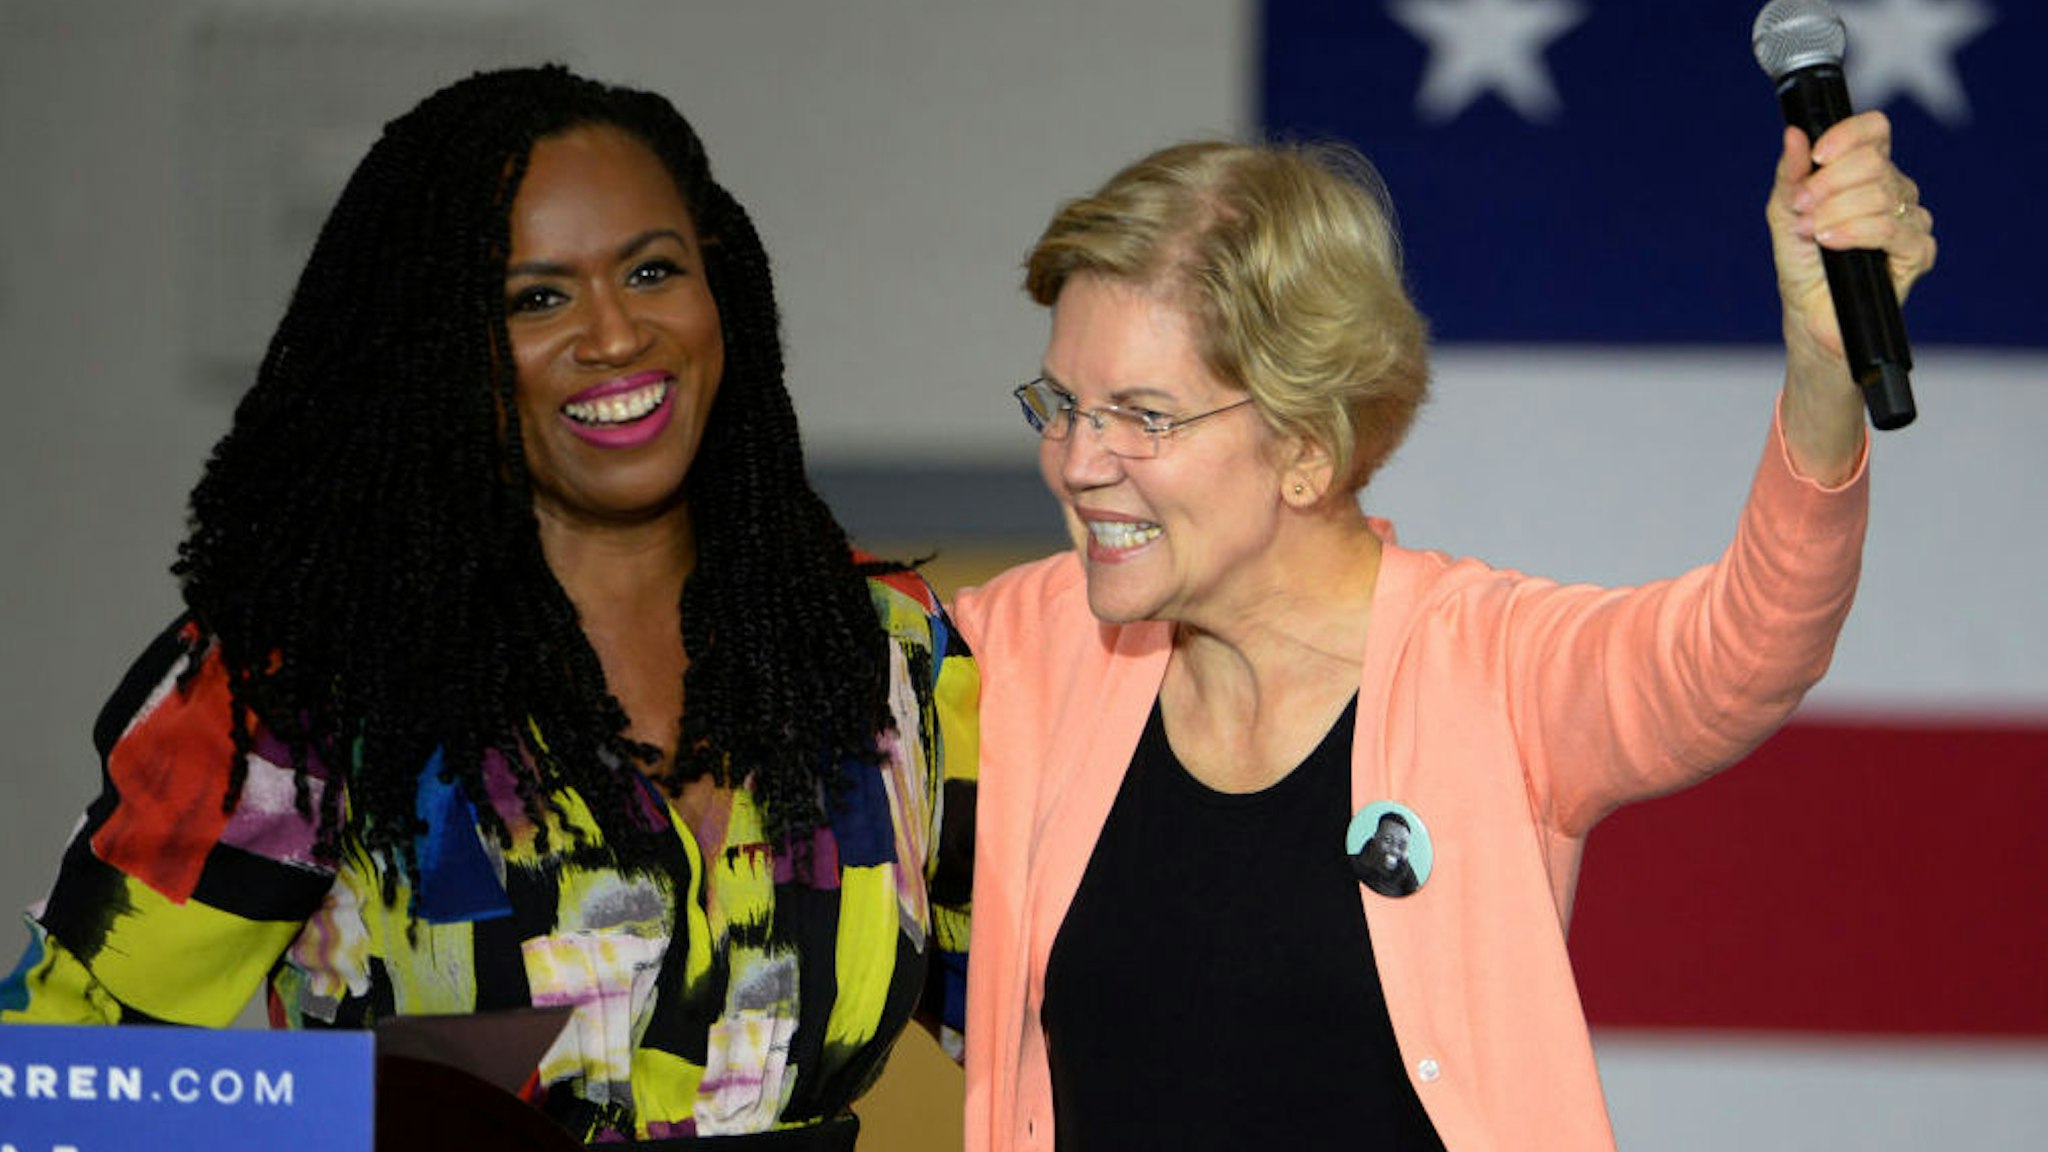 RALEIGH, NC - NOVEMBER 07: Rep. Ayanna Pressley (D-MA), left, endorses Democratic presidential candidate Sen. Elizabeth Warren (D-MA) during a campaign stop at Broughton High School on November 7, 2019 in Raleigh, North Carolina. Pressley broke from the ÒsquadÓ to endorse Warren. (